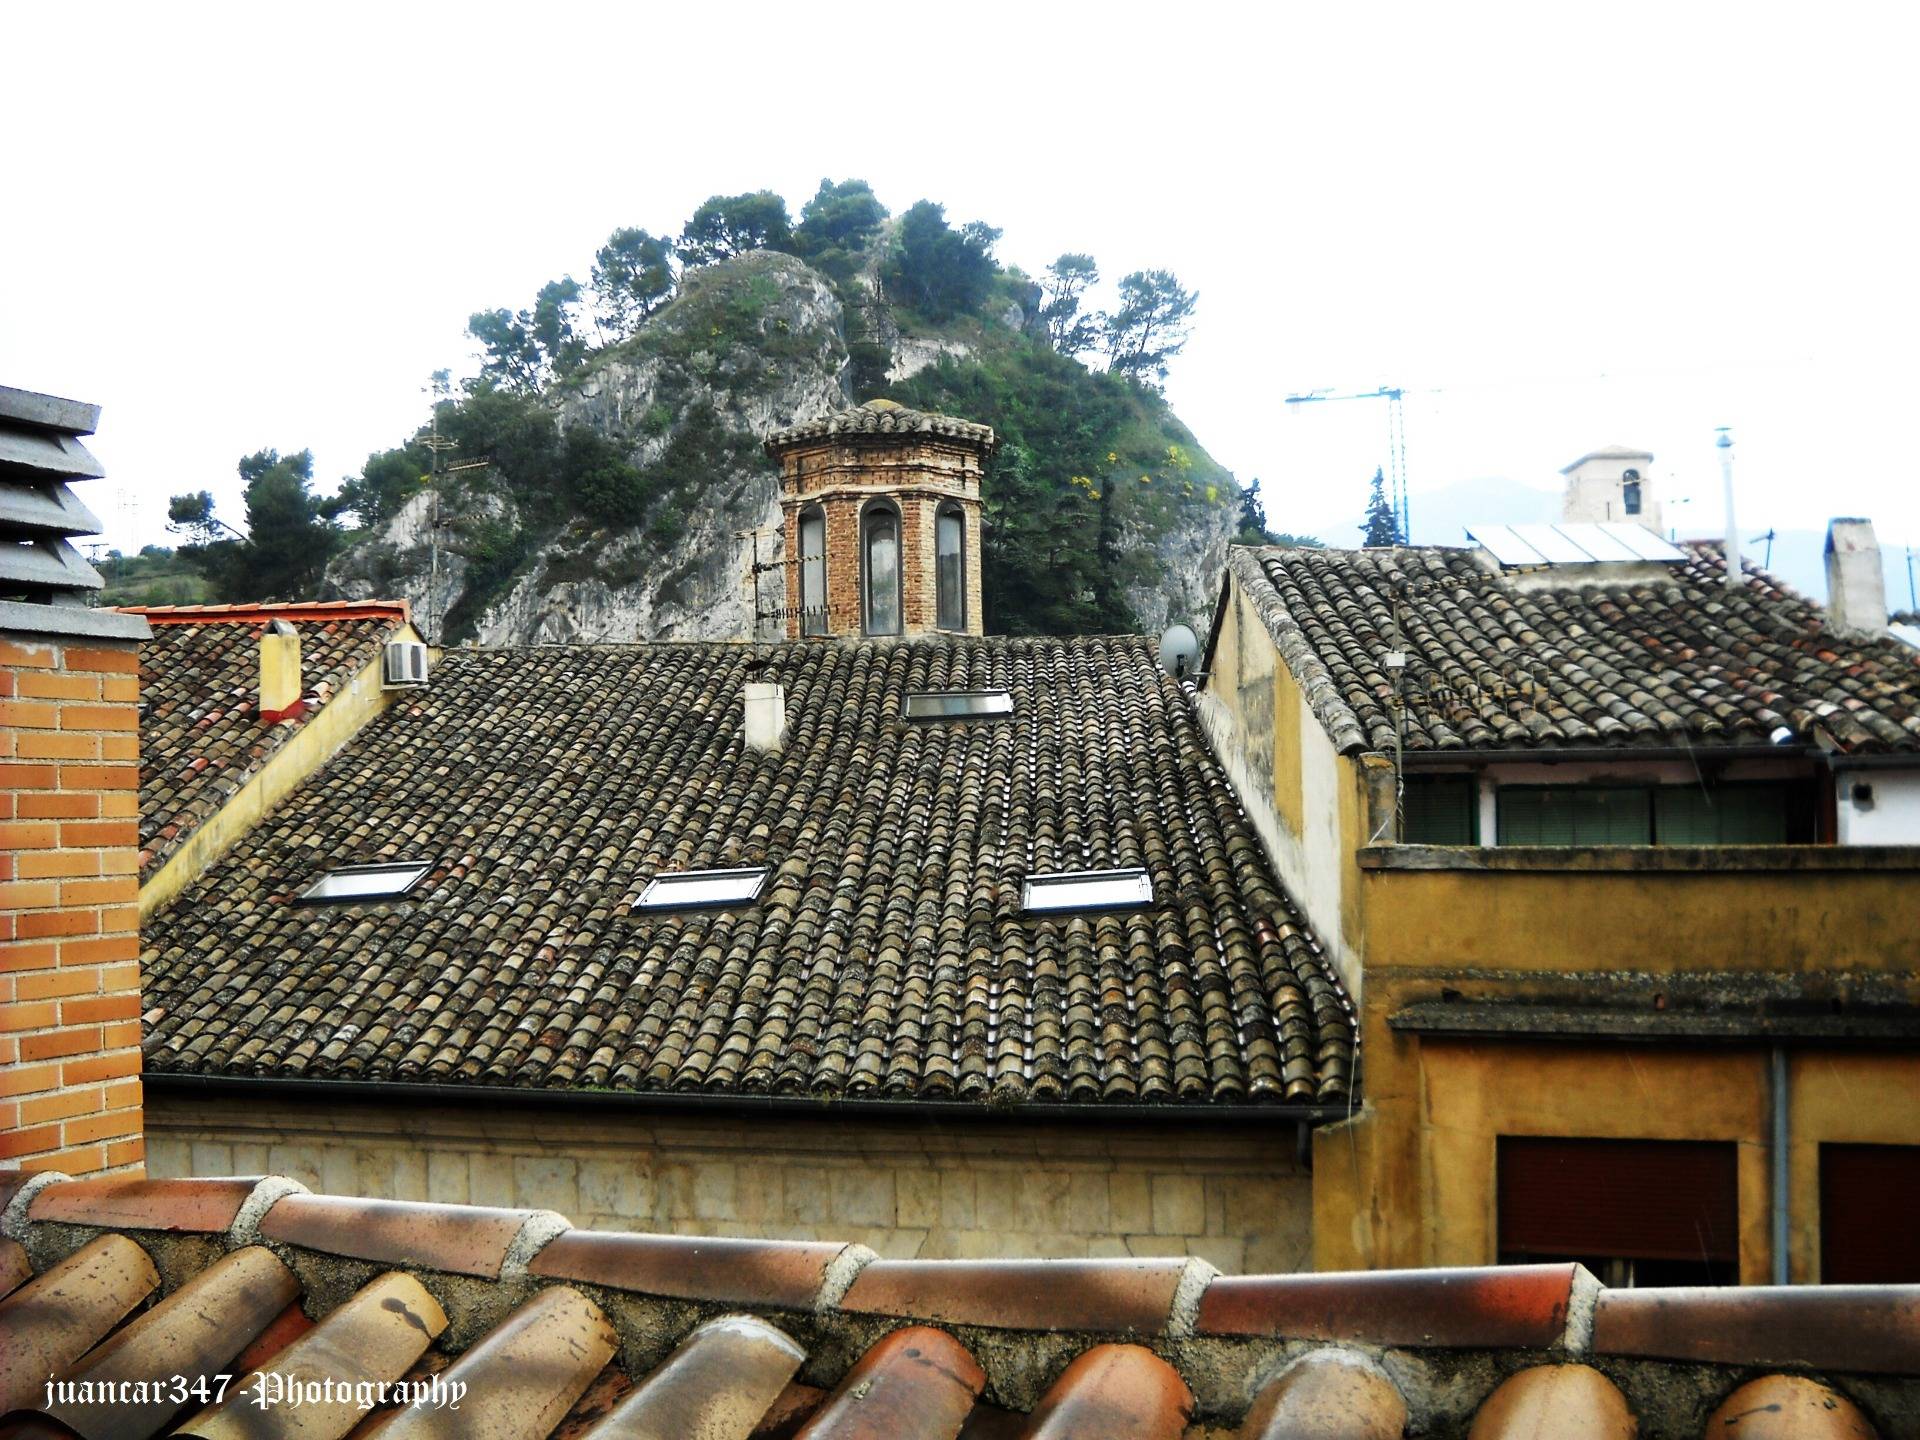 On the rooftops of Estella